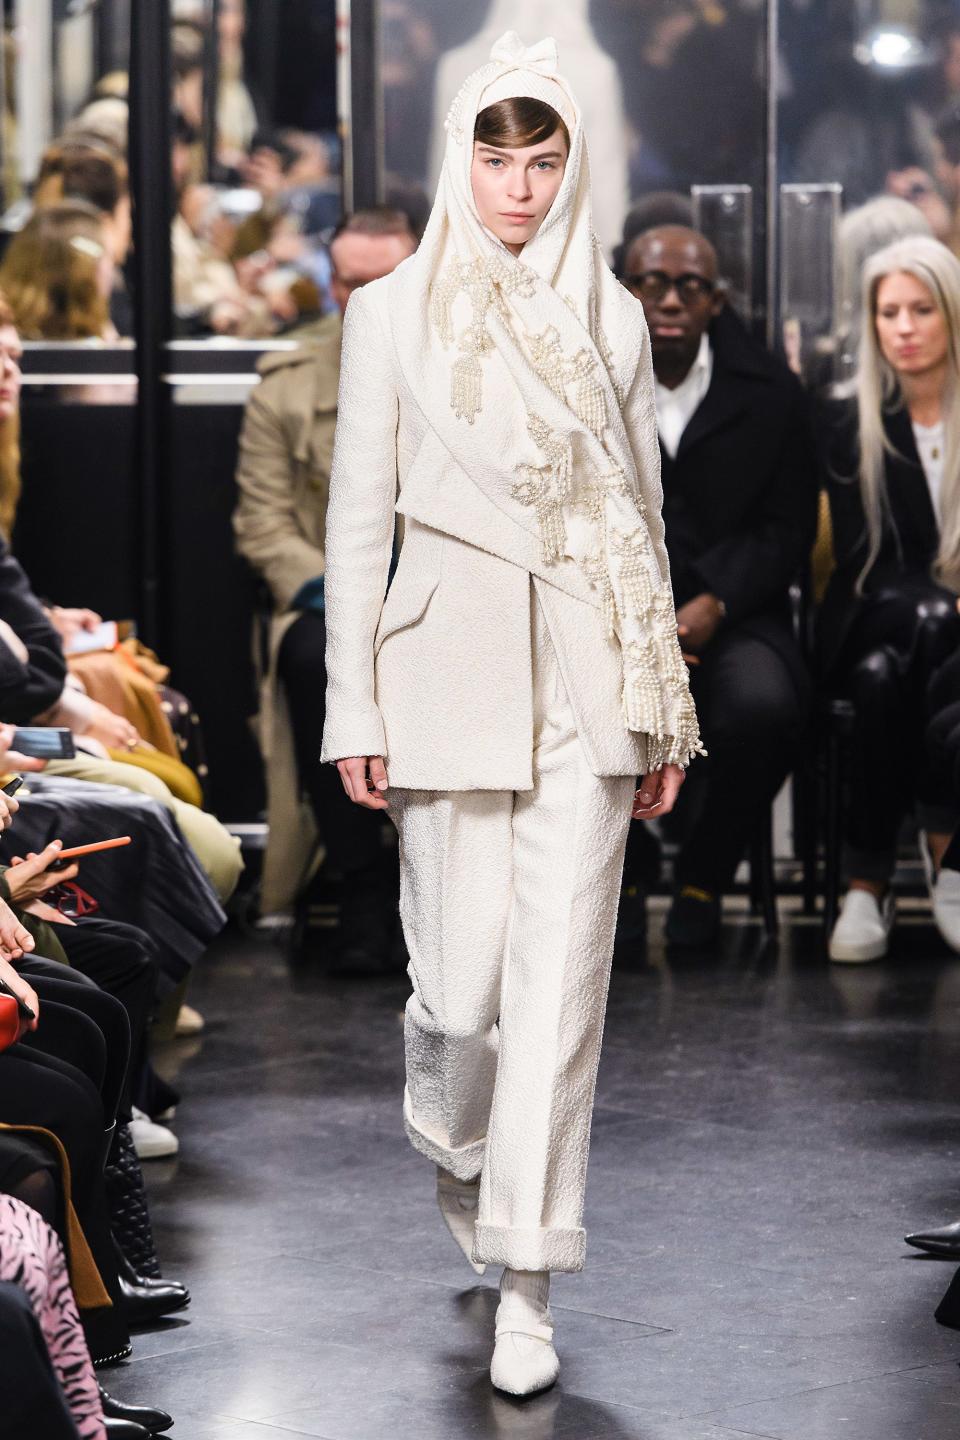 You can skip the hassle of making bridal appointments or ordering a made-to-measure gown by shopping these ivory dresses and cream suits straight from the Fall runways.